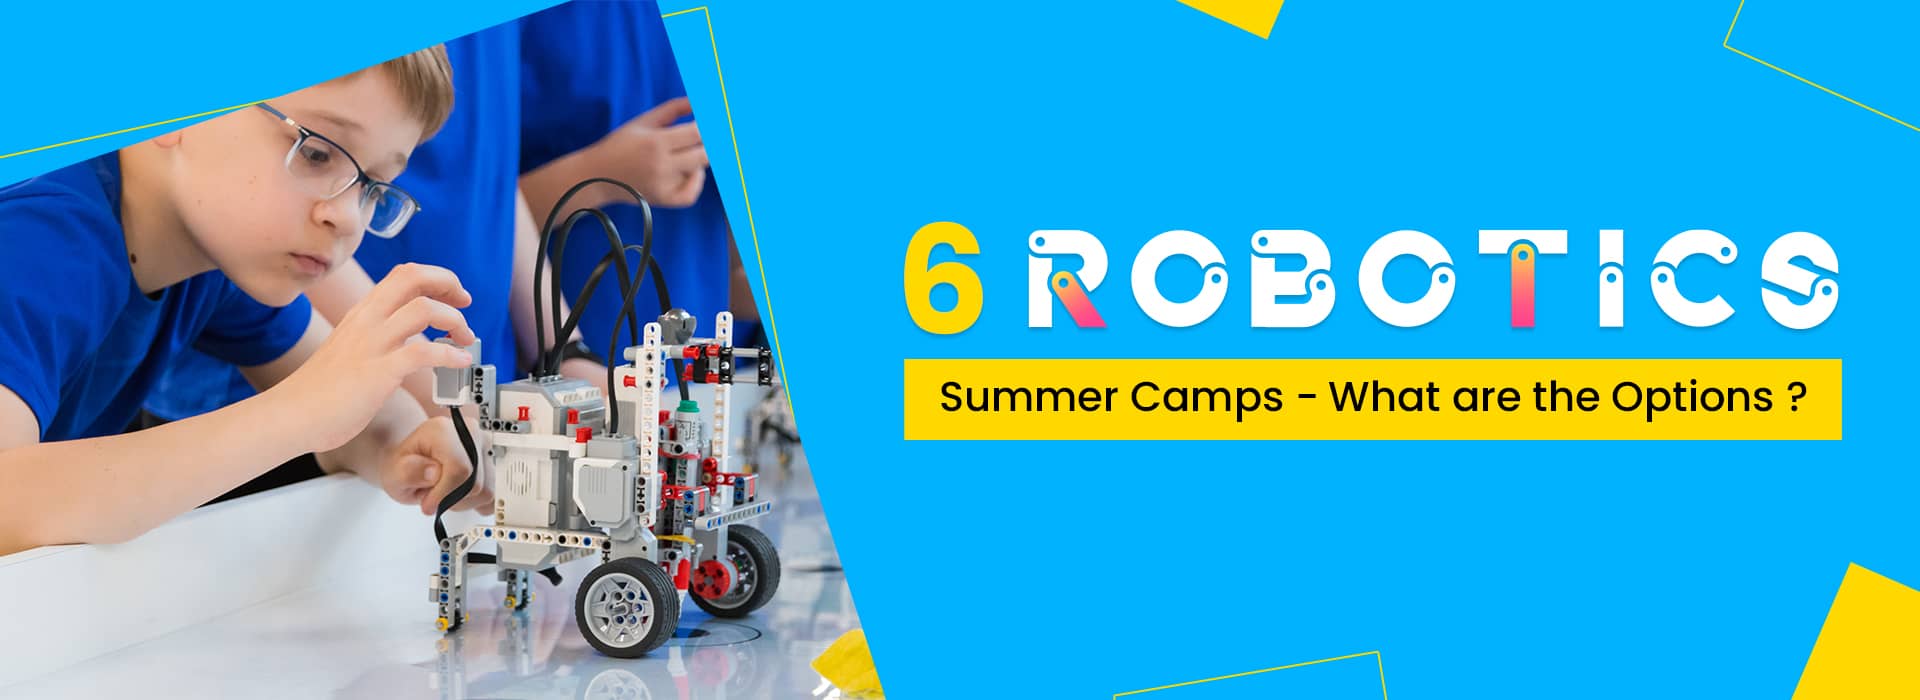 Best Robotics Summer Camps in the USA